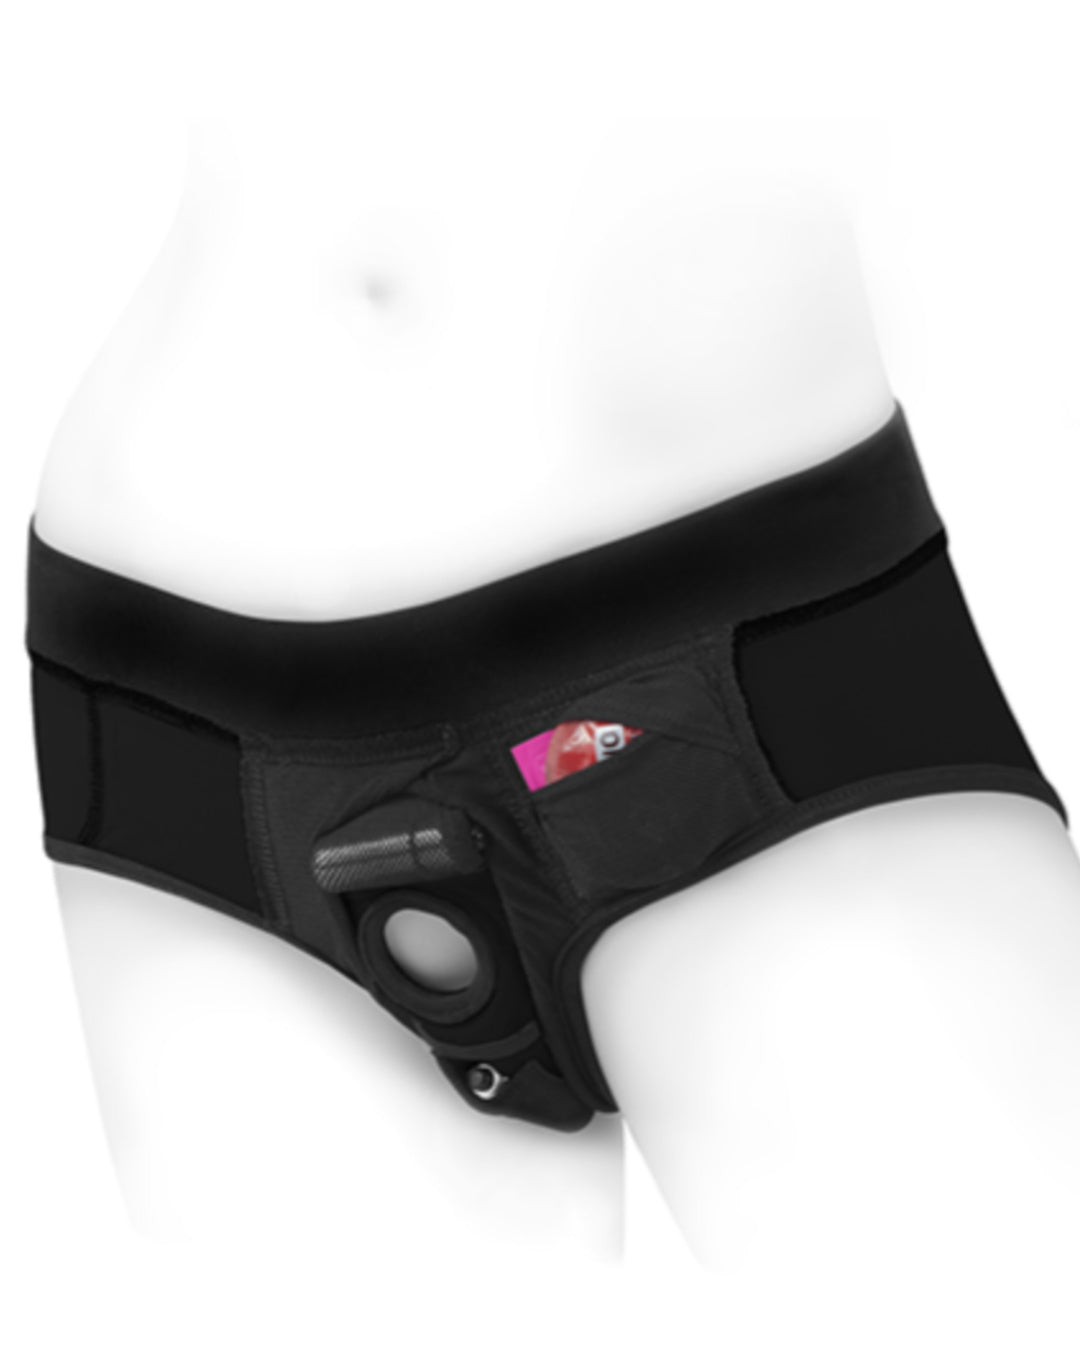 SpareParts Tomboi Plus Size Strap-on Harness Briefs